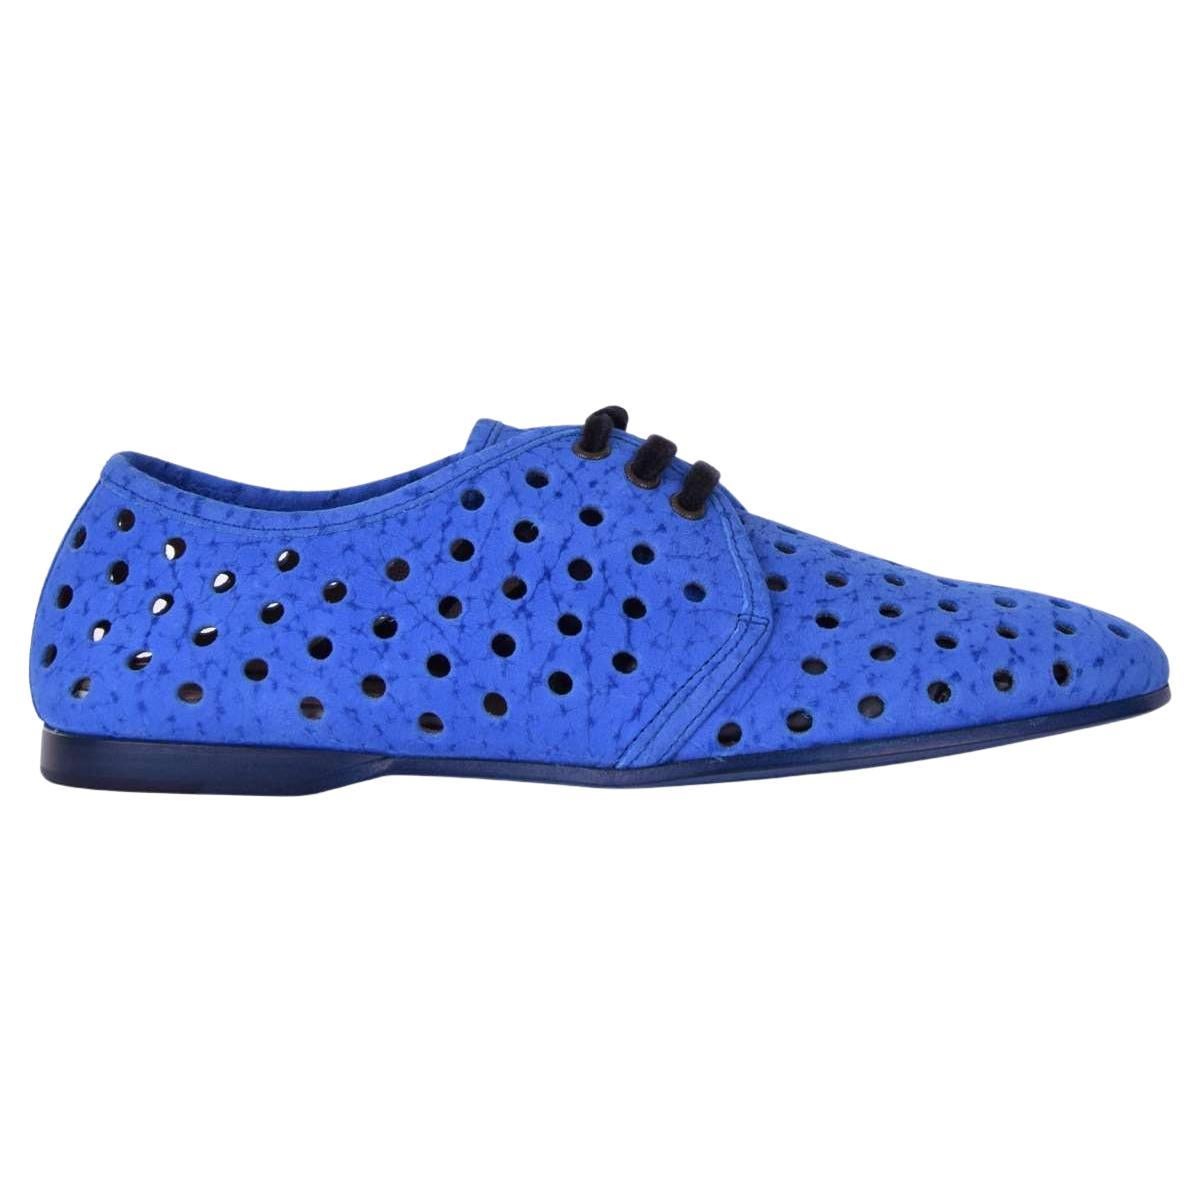 Dolce & Gabbana - Perforated Shoes AMALFI Blue EUR 39 For Sale